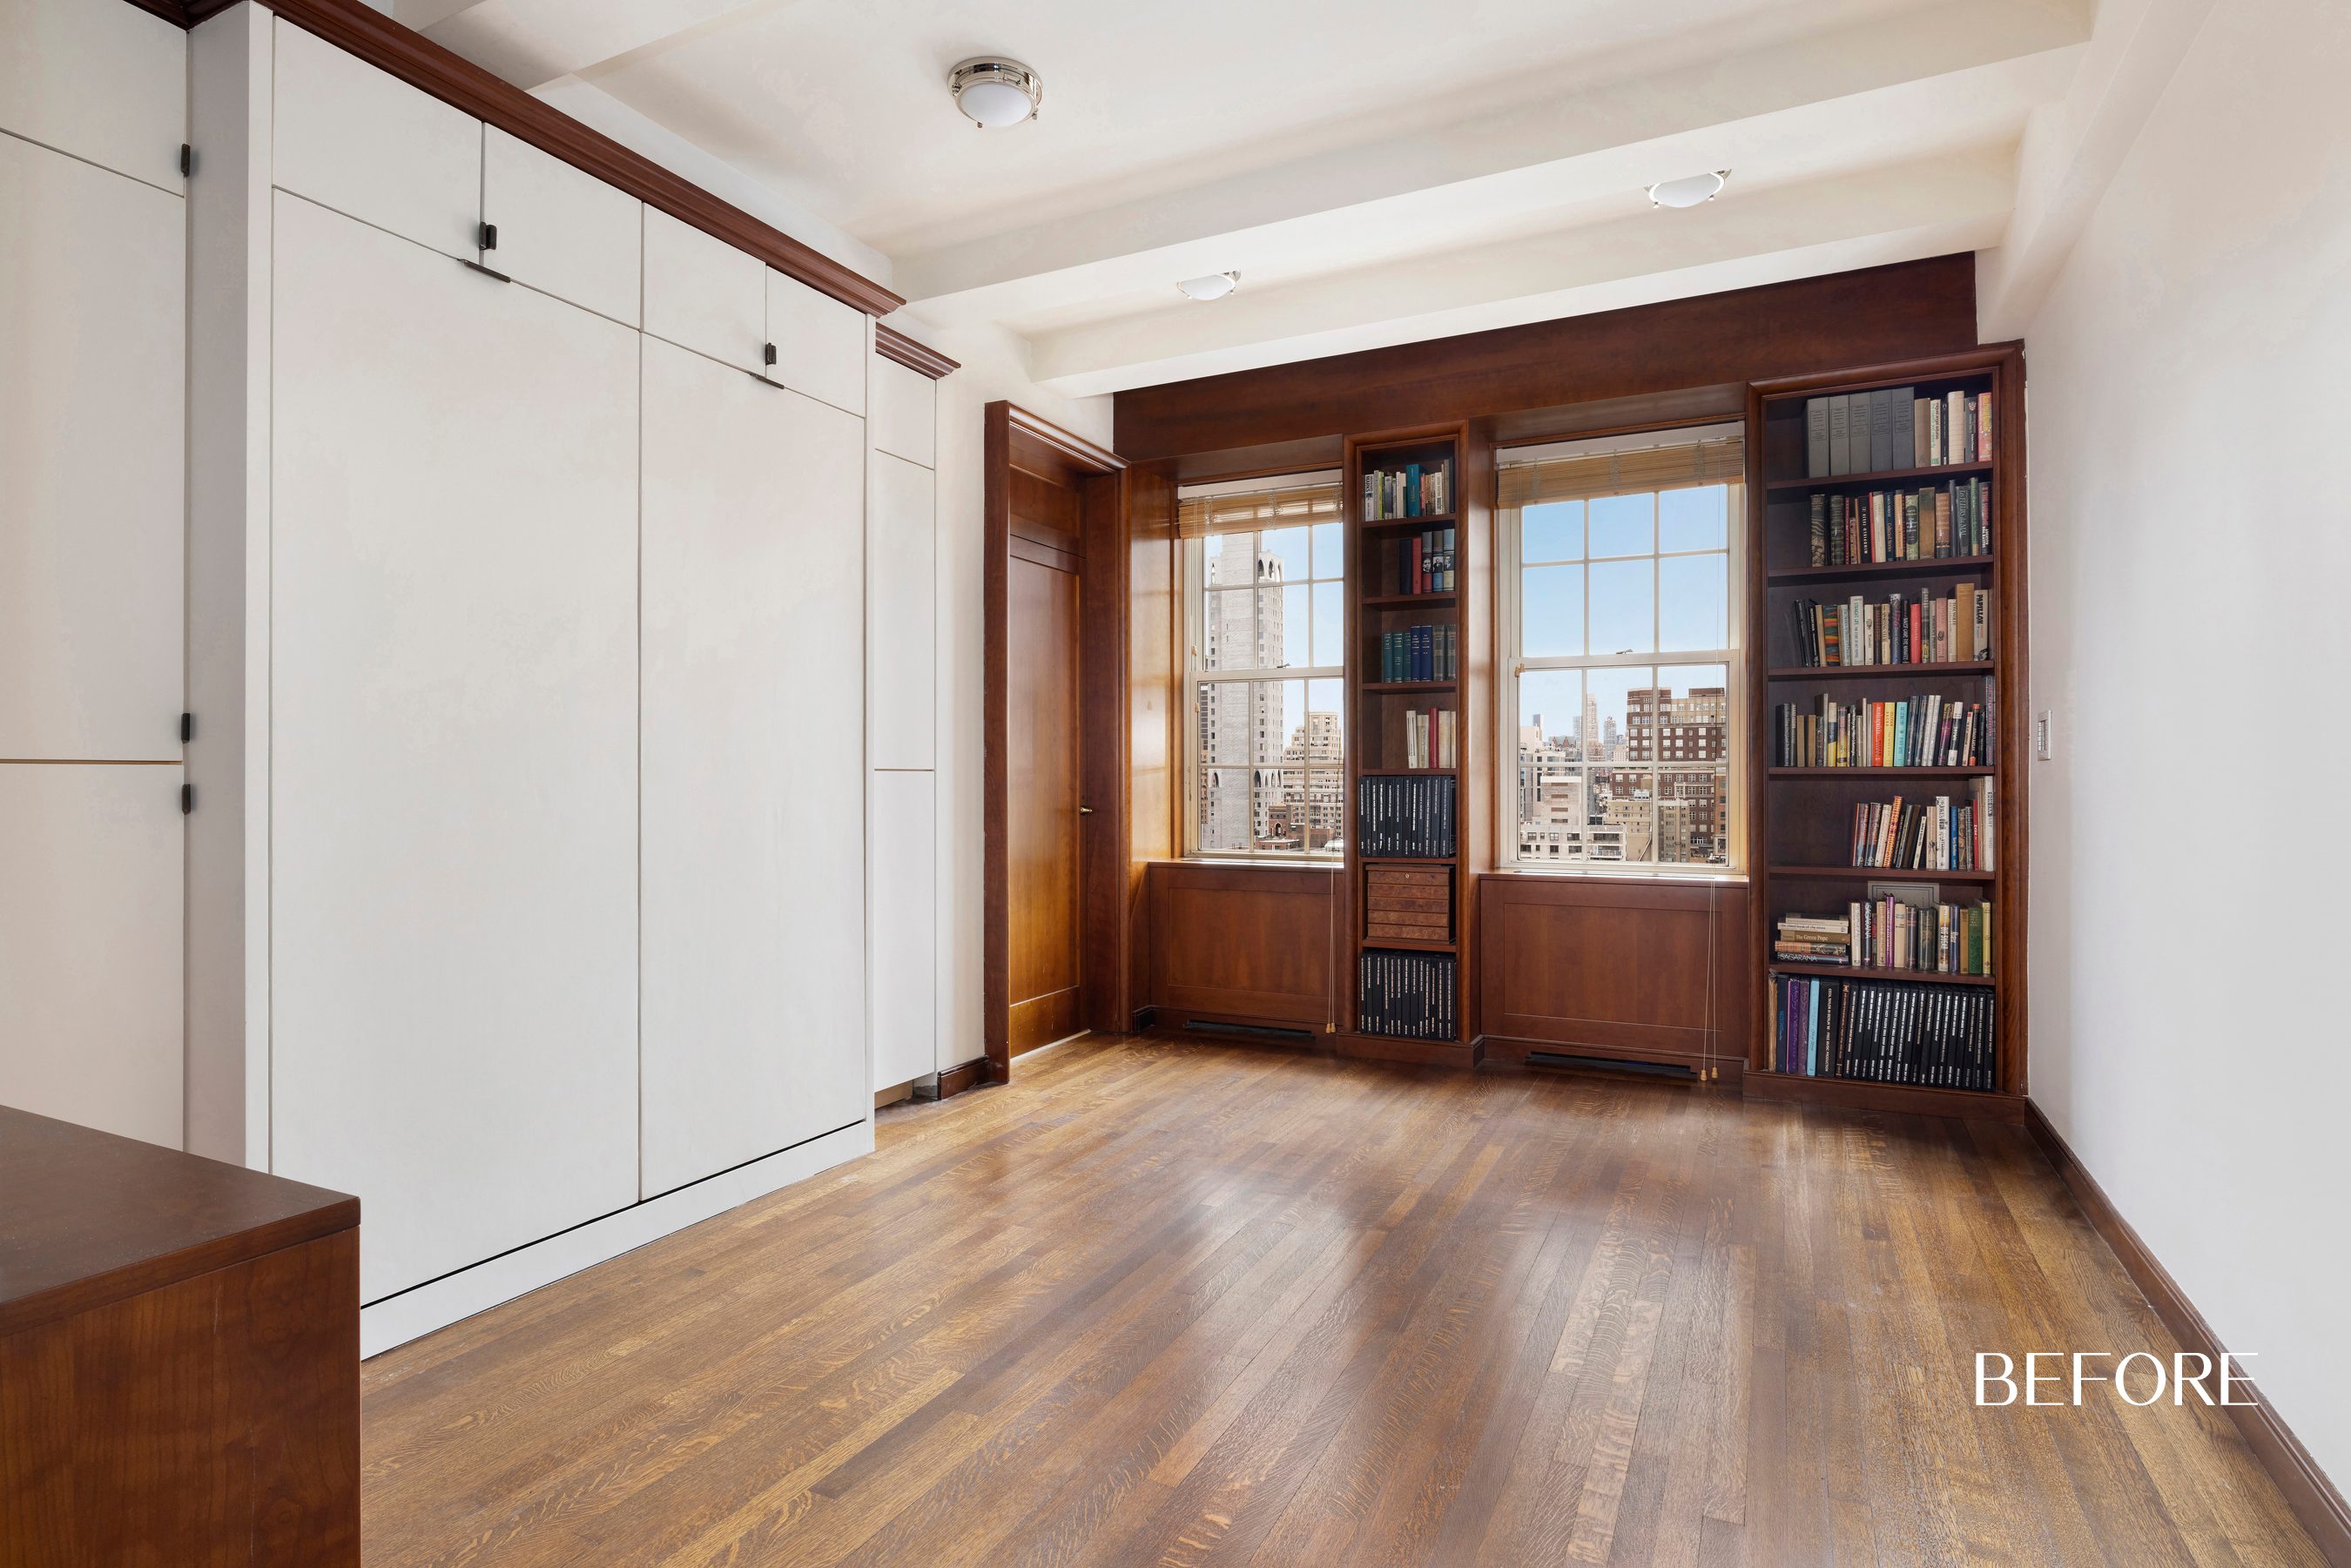 An empty room with windows and brown built-in bookshelves flanking the windows